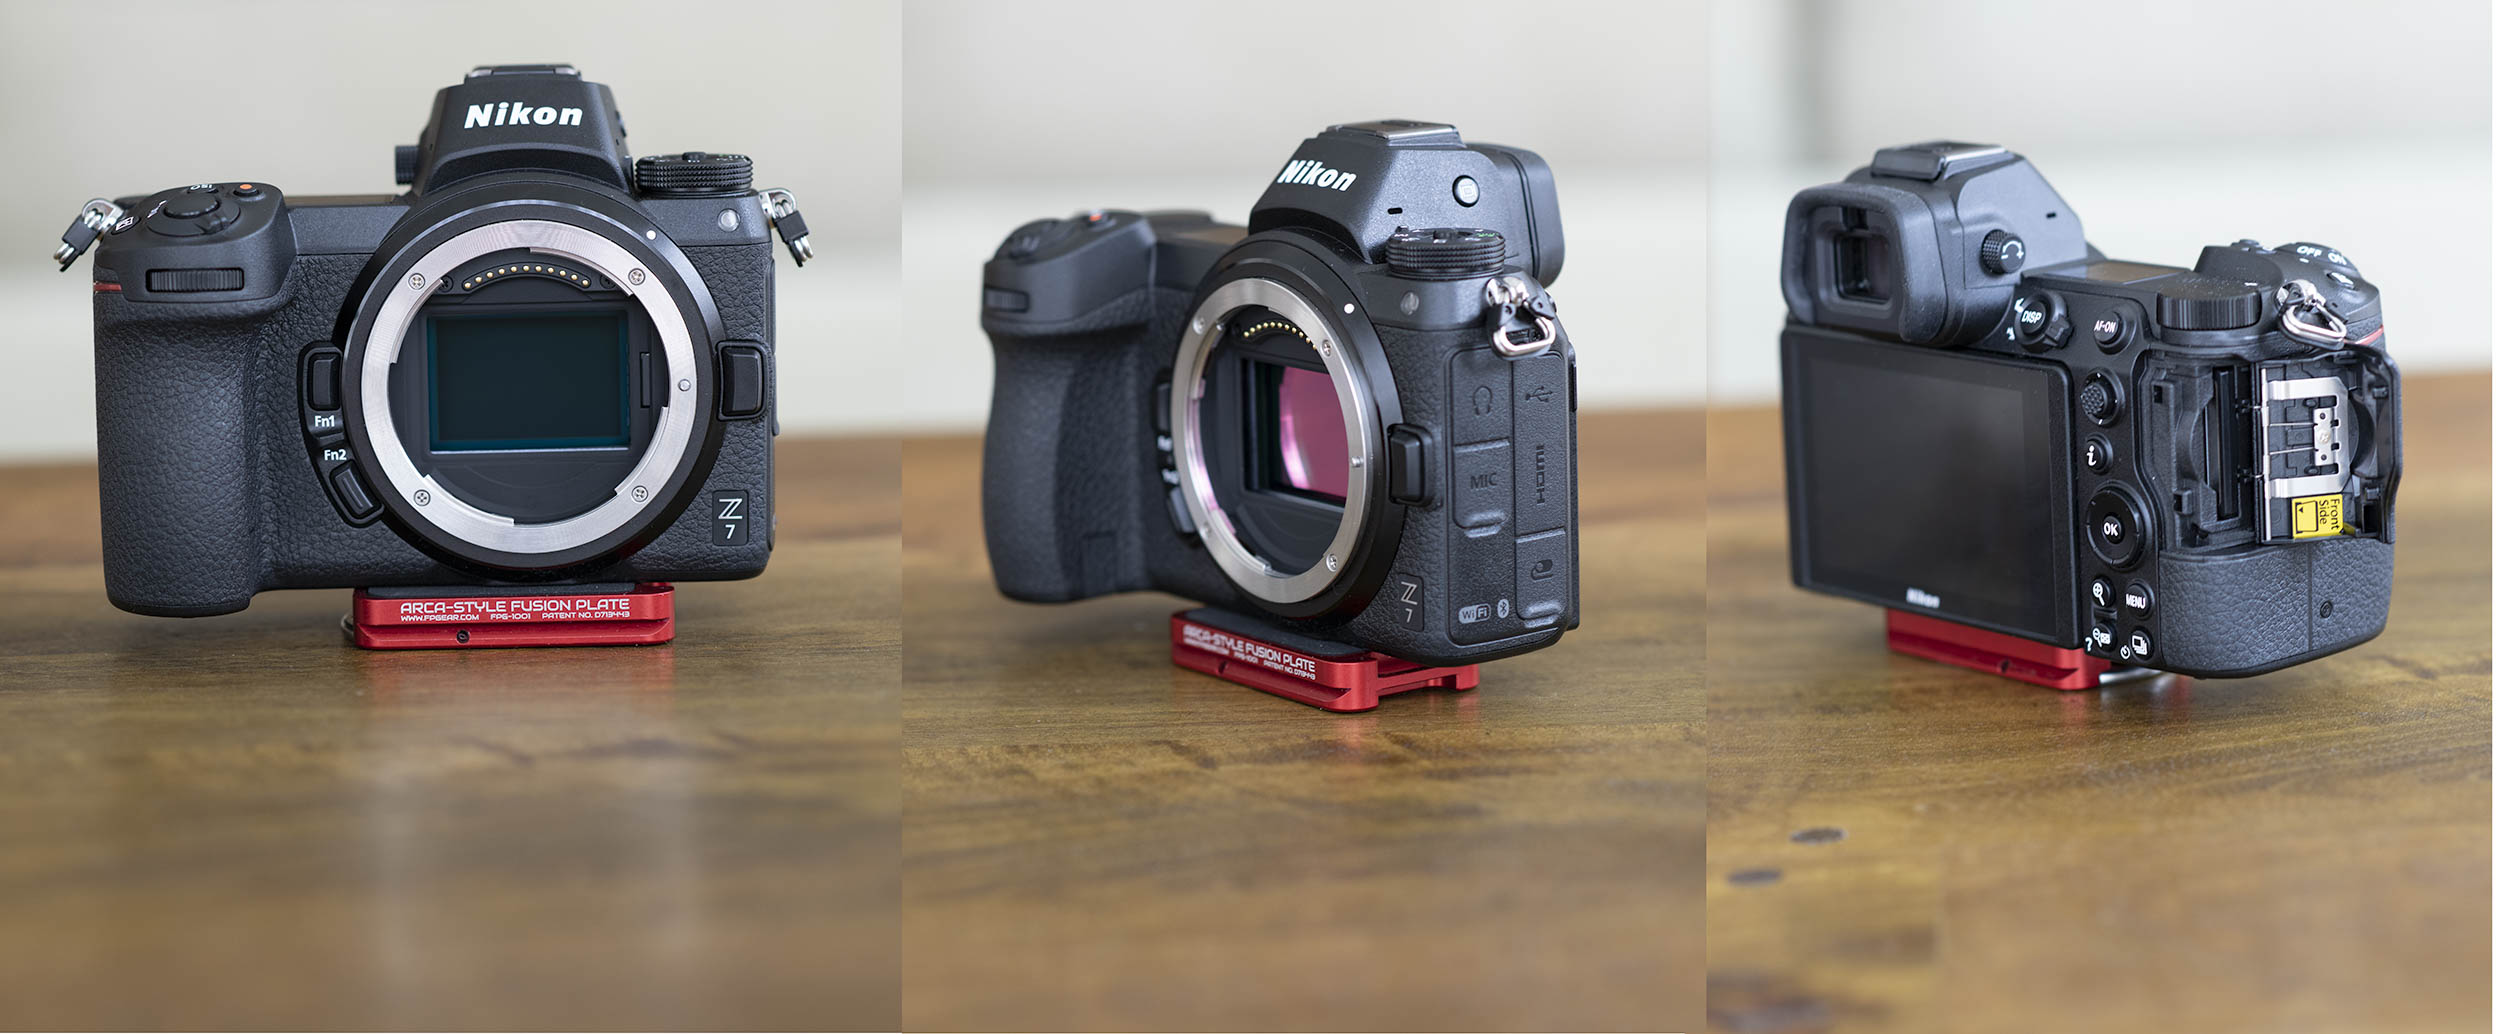 nikon z7 hands on review 2 image 